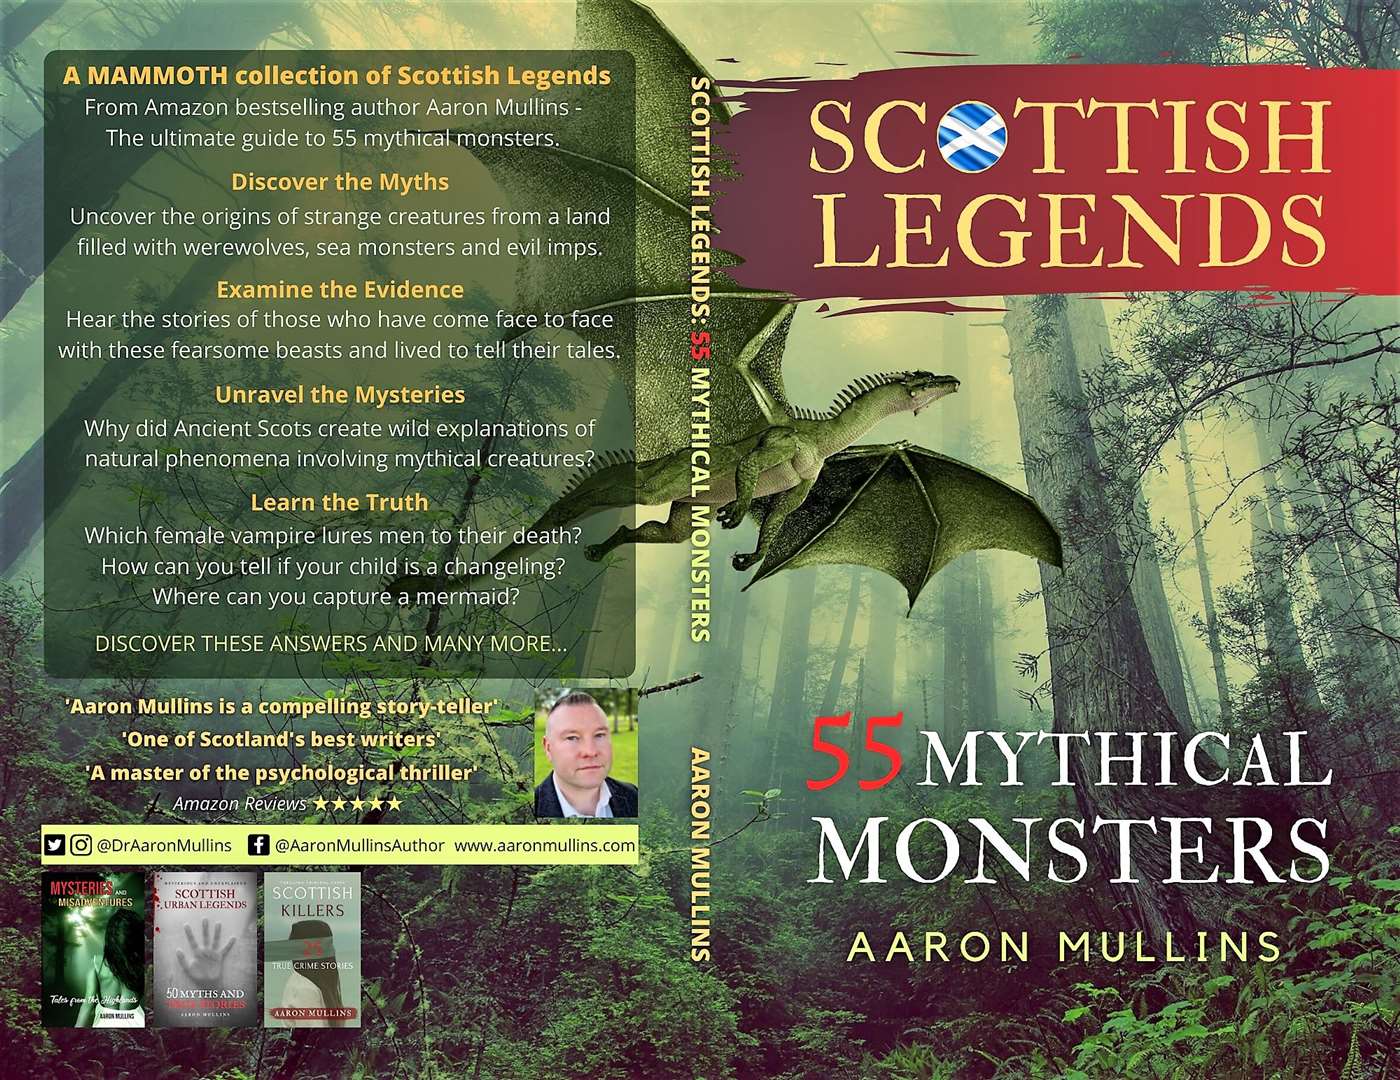 Full book cover for Aaron Mullins' new book.